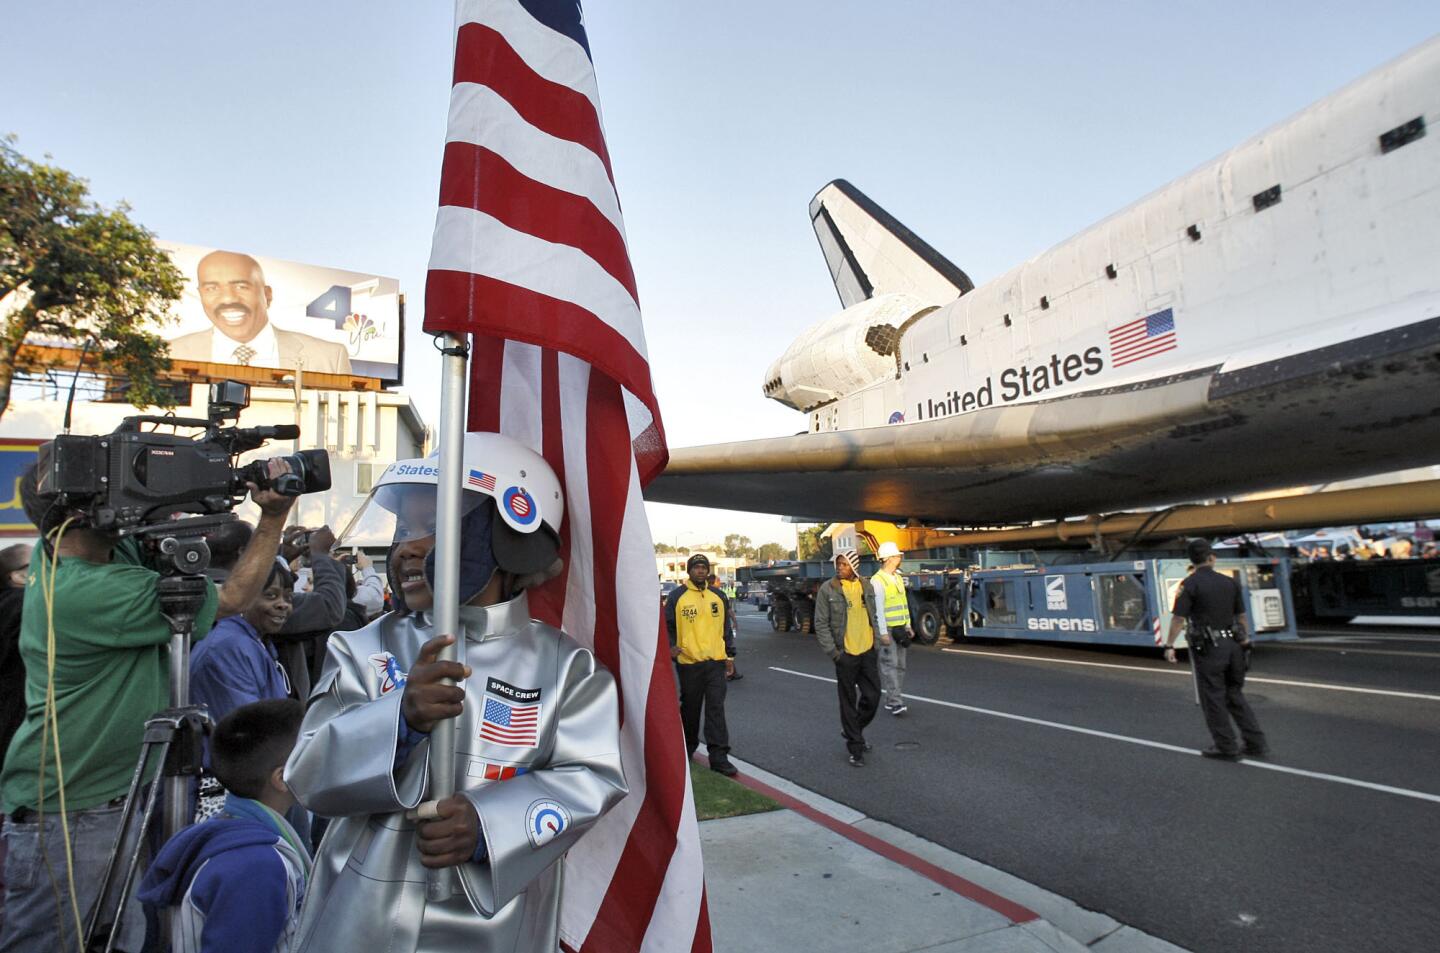 Photo Gallery: Space Shuttle Endeavour makes its way through Inglewood